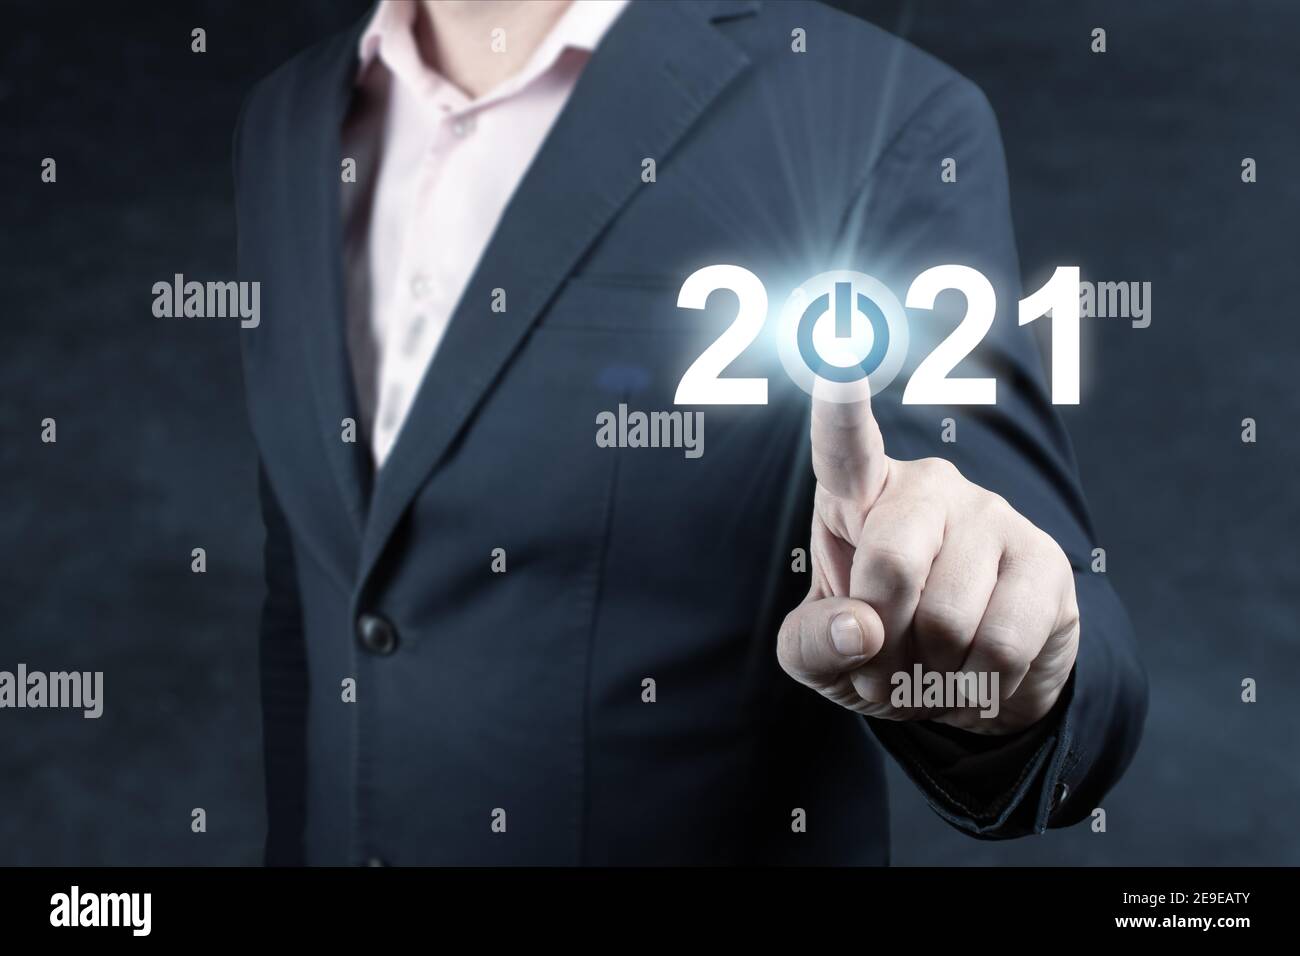 Business and Technology target set goals and achievement in 2021 new year resolution, planning and start up strategies and ideas Stock Photo